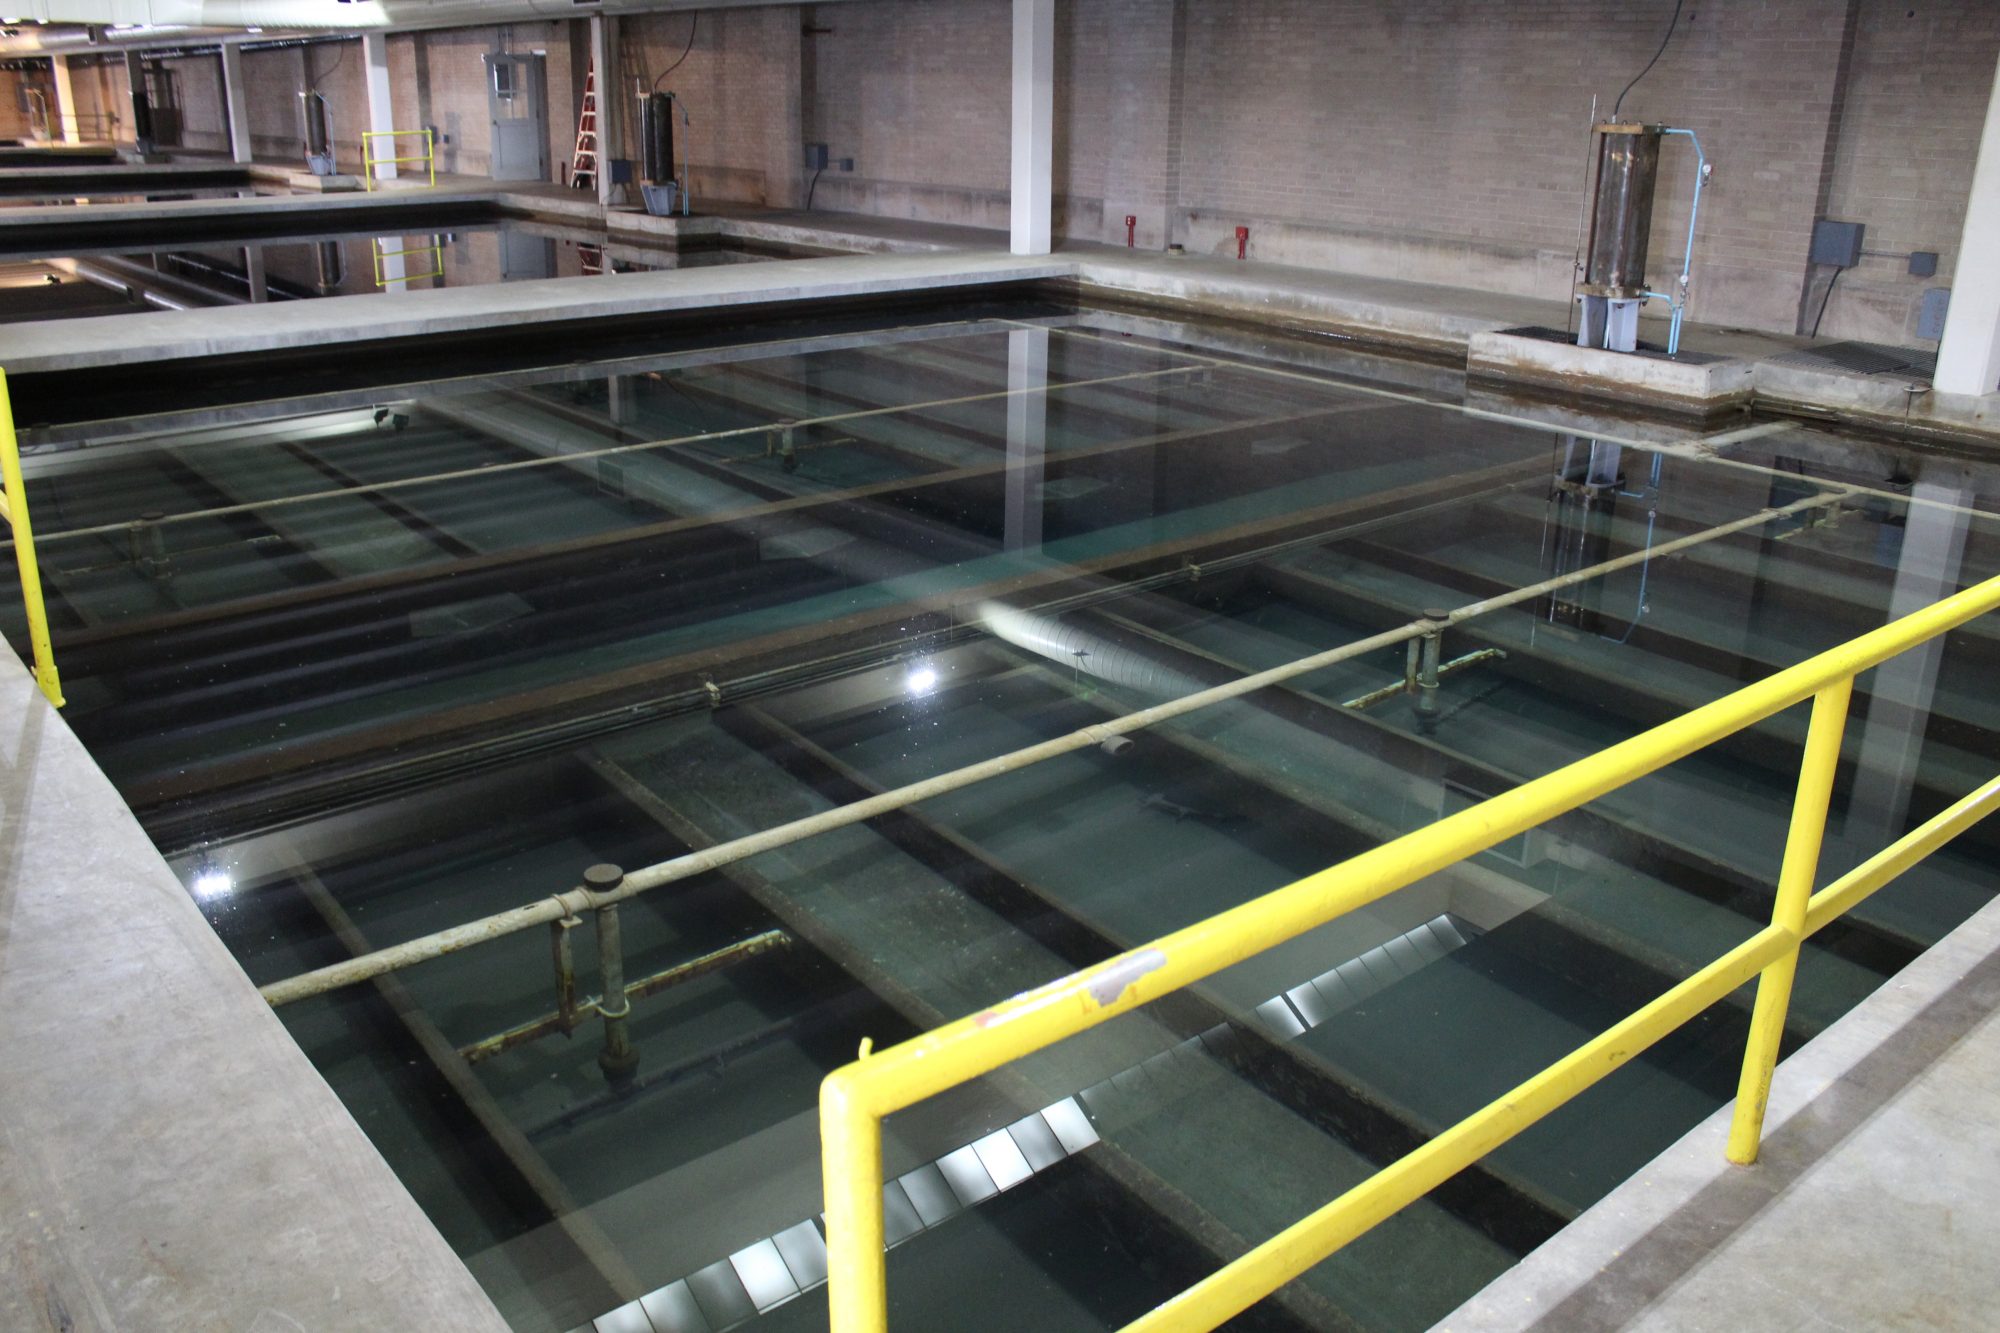 Filter bed at a water treatment plant